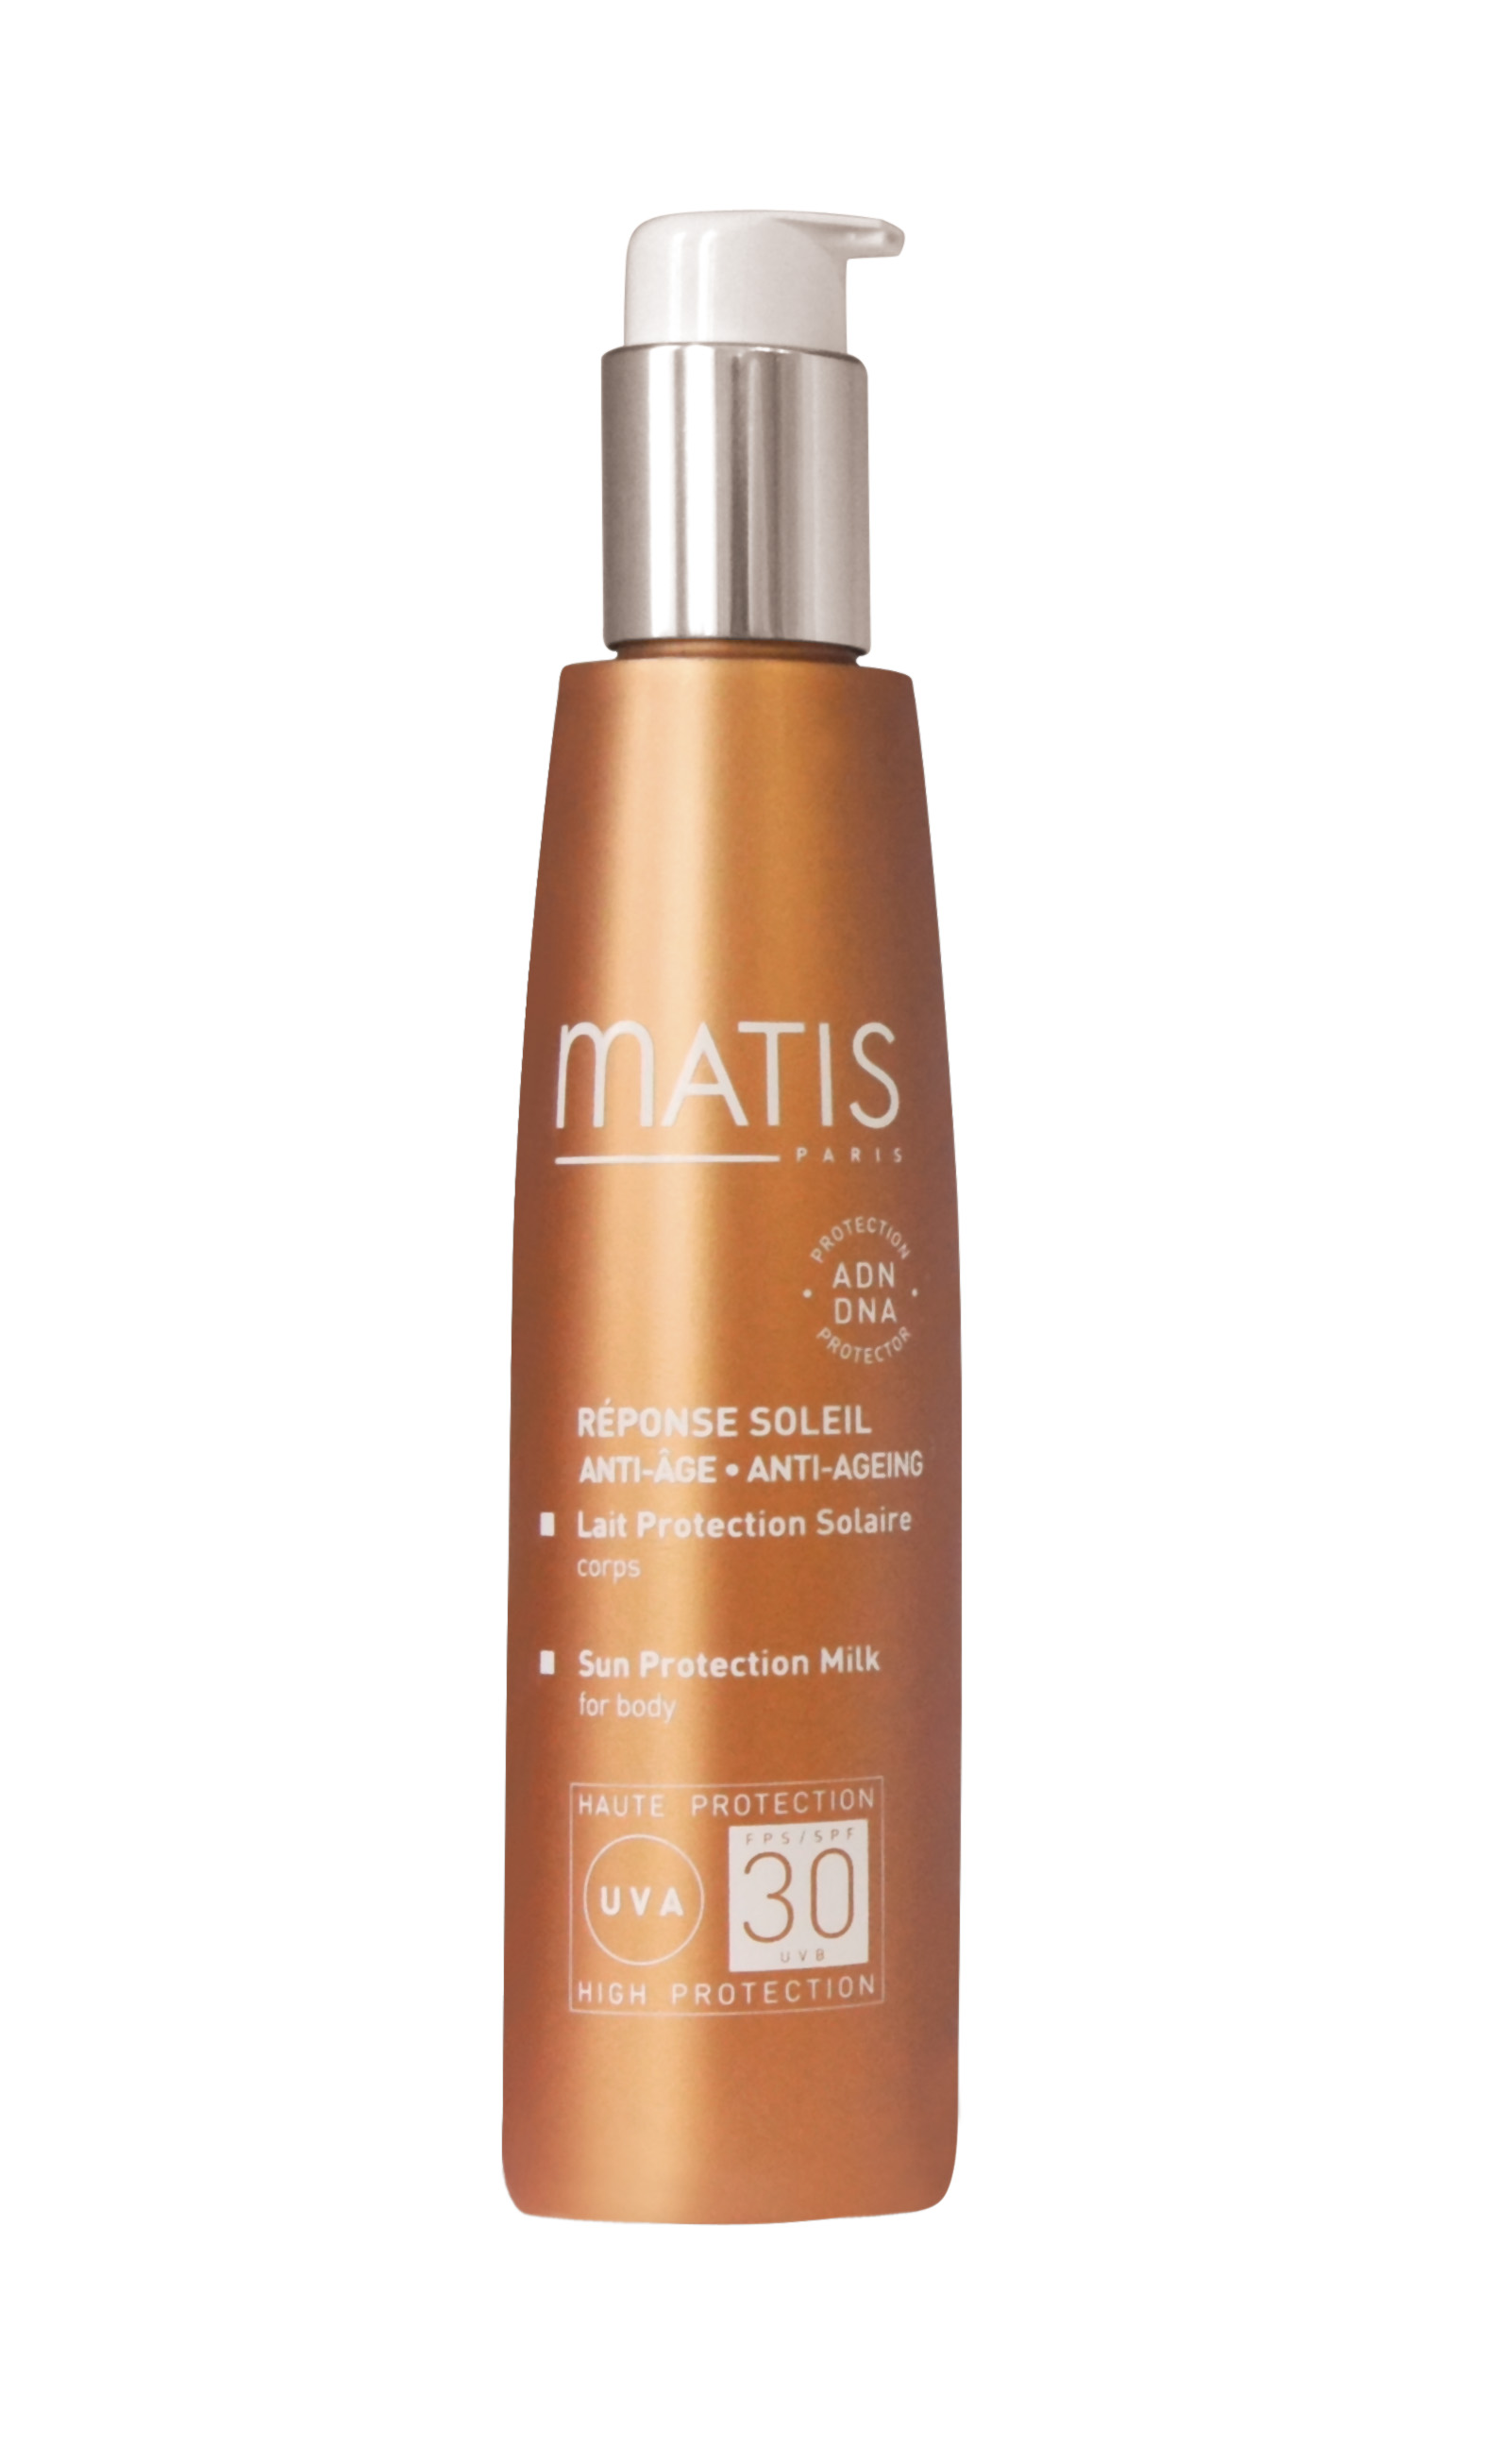 Lait Protection Solaire - SPF 30 UVA/UVB - Corps - 50 %